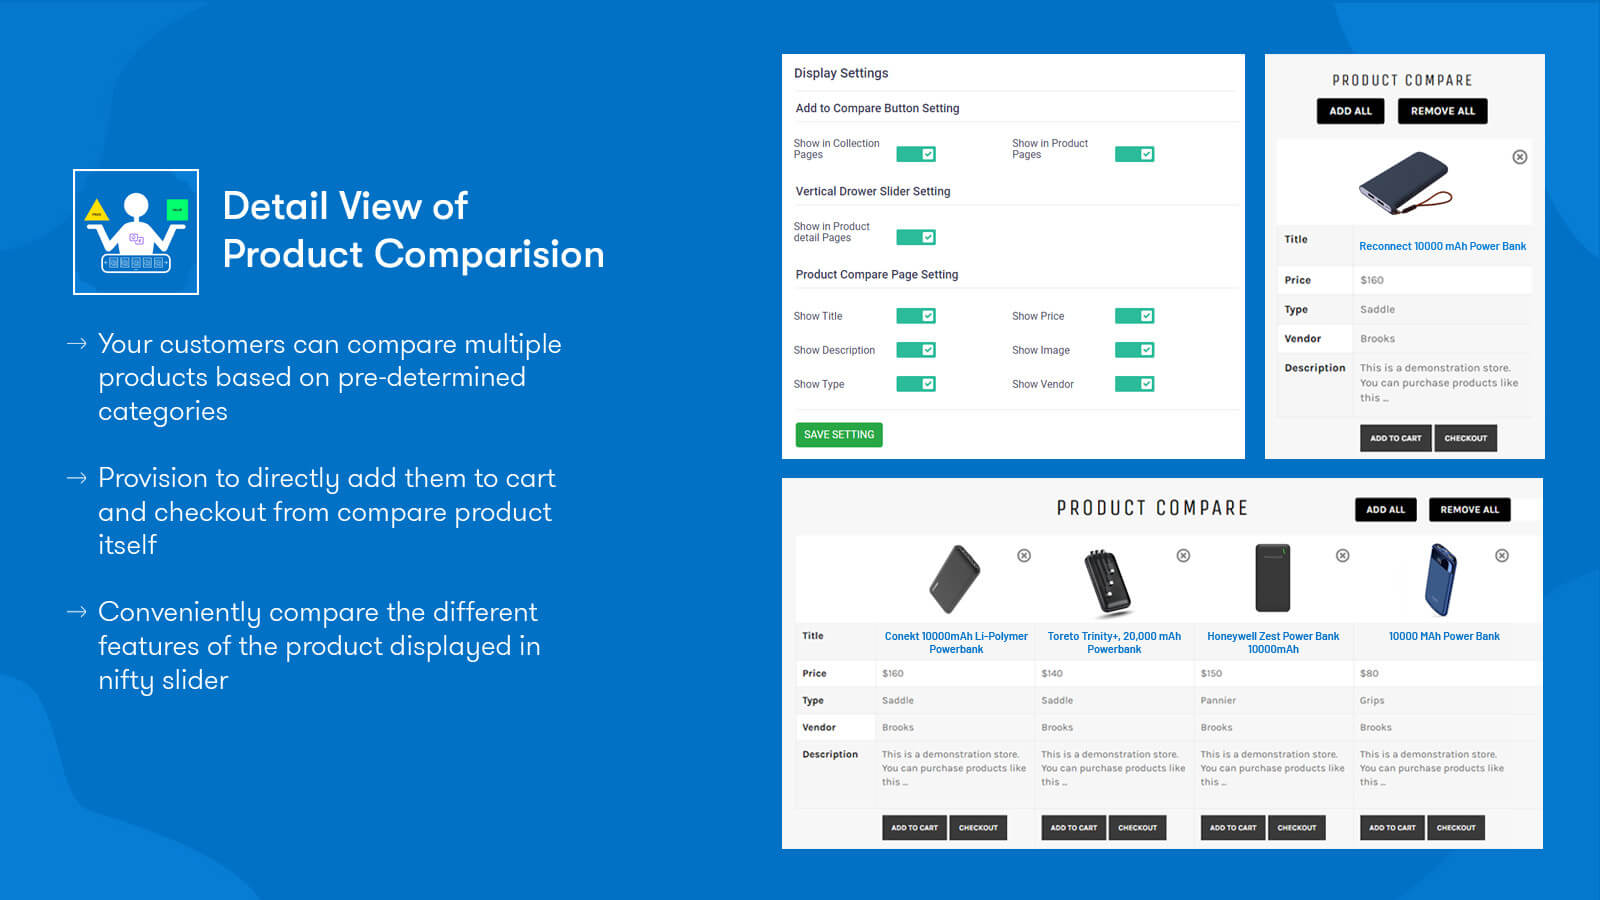 Quick Product Compare deserves to be listed as one of the best Shopify product compare apps